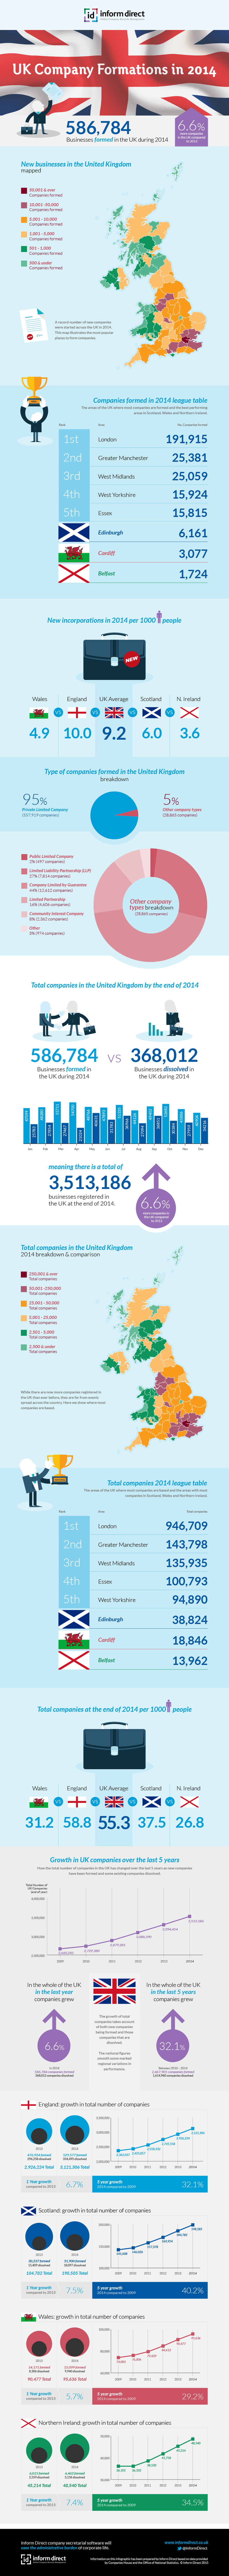 Inform Direct - Company Formations in UK 2014 Infographic